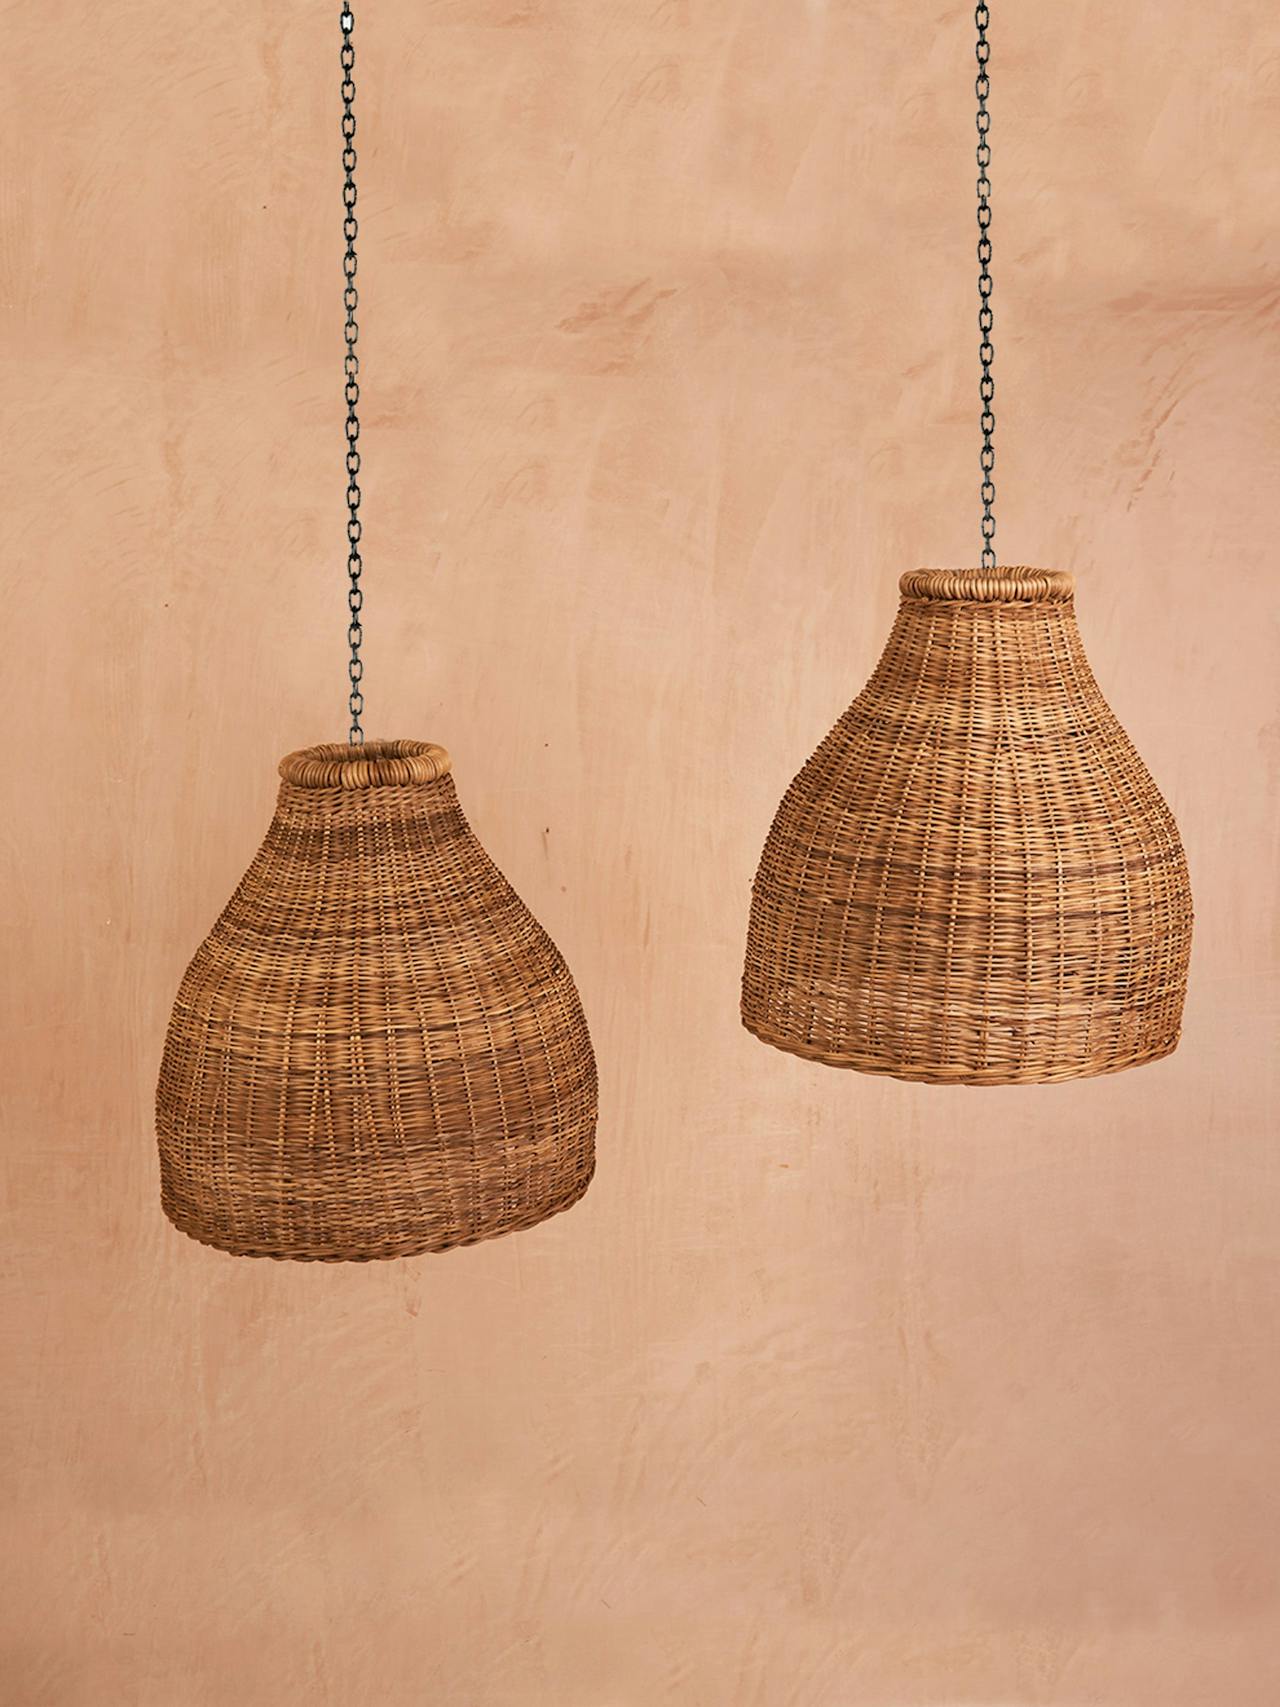 Discover Hadeda homeware on Collagerie. Shop hand-woven artisan-made decorative pieces on Collagerie. Sustainably sourced from Africa, delivered in the UK. Free returns & easy shipping on Collagerie | Collagerie.com